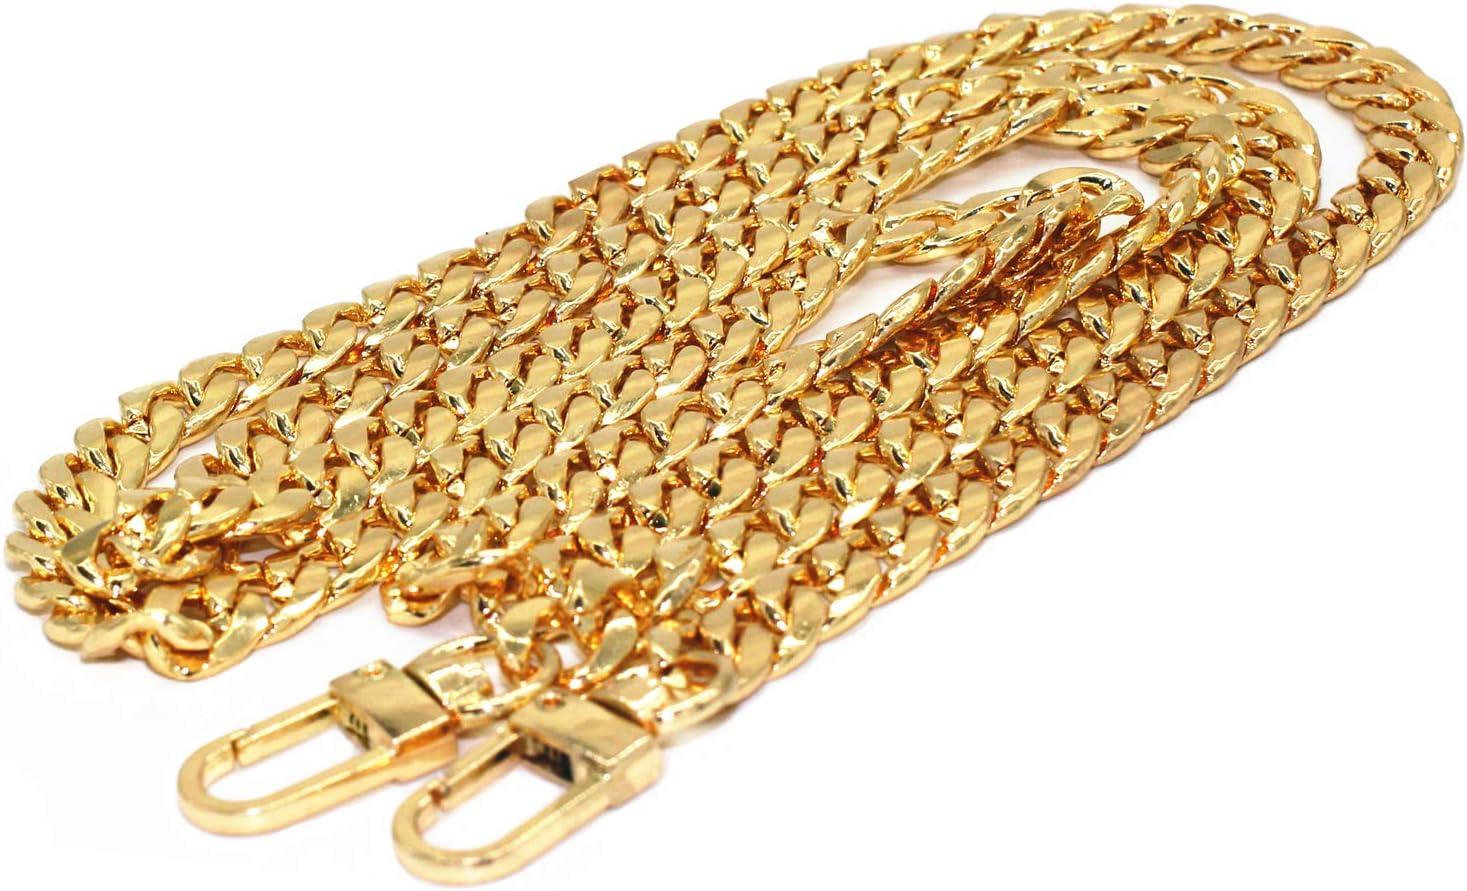  uxcell Purse Chain Strap, 47 Inch Leather Iron Chain